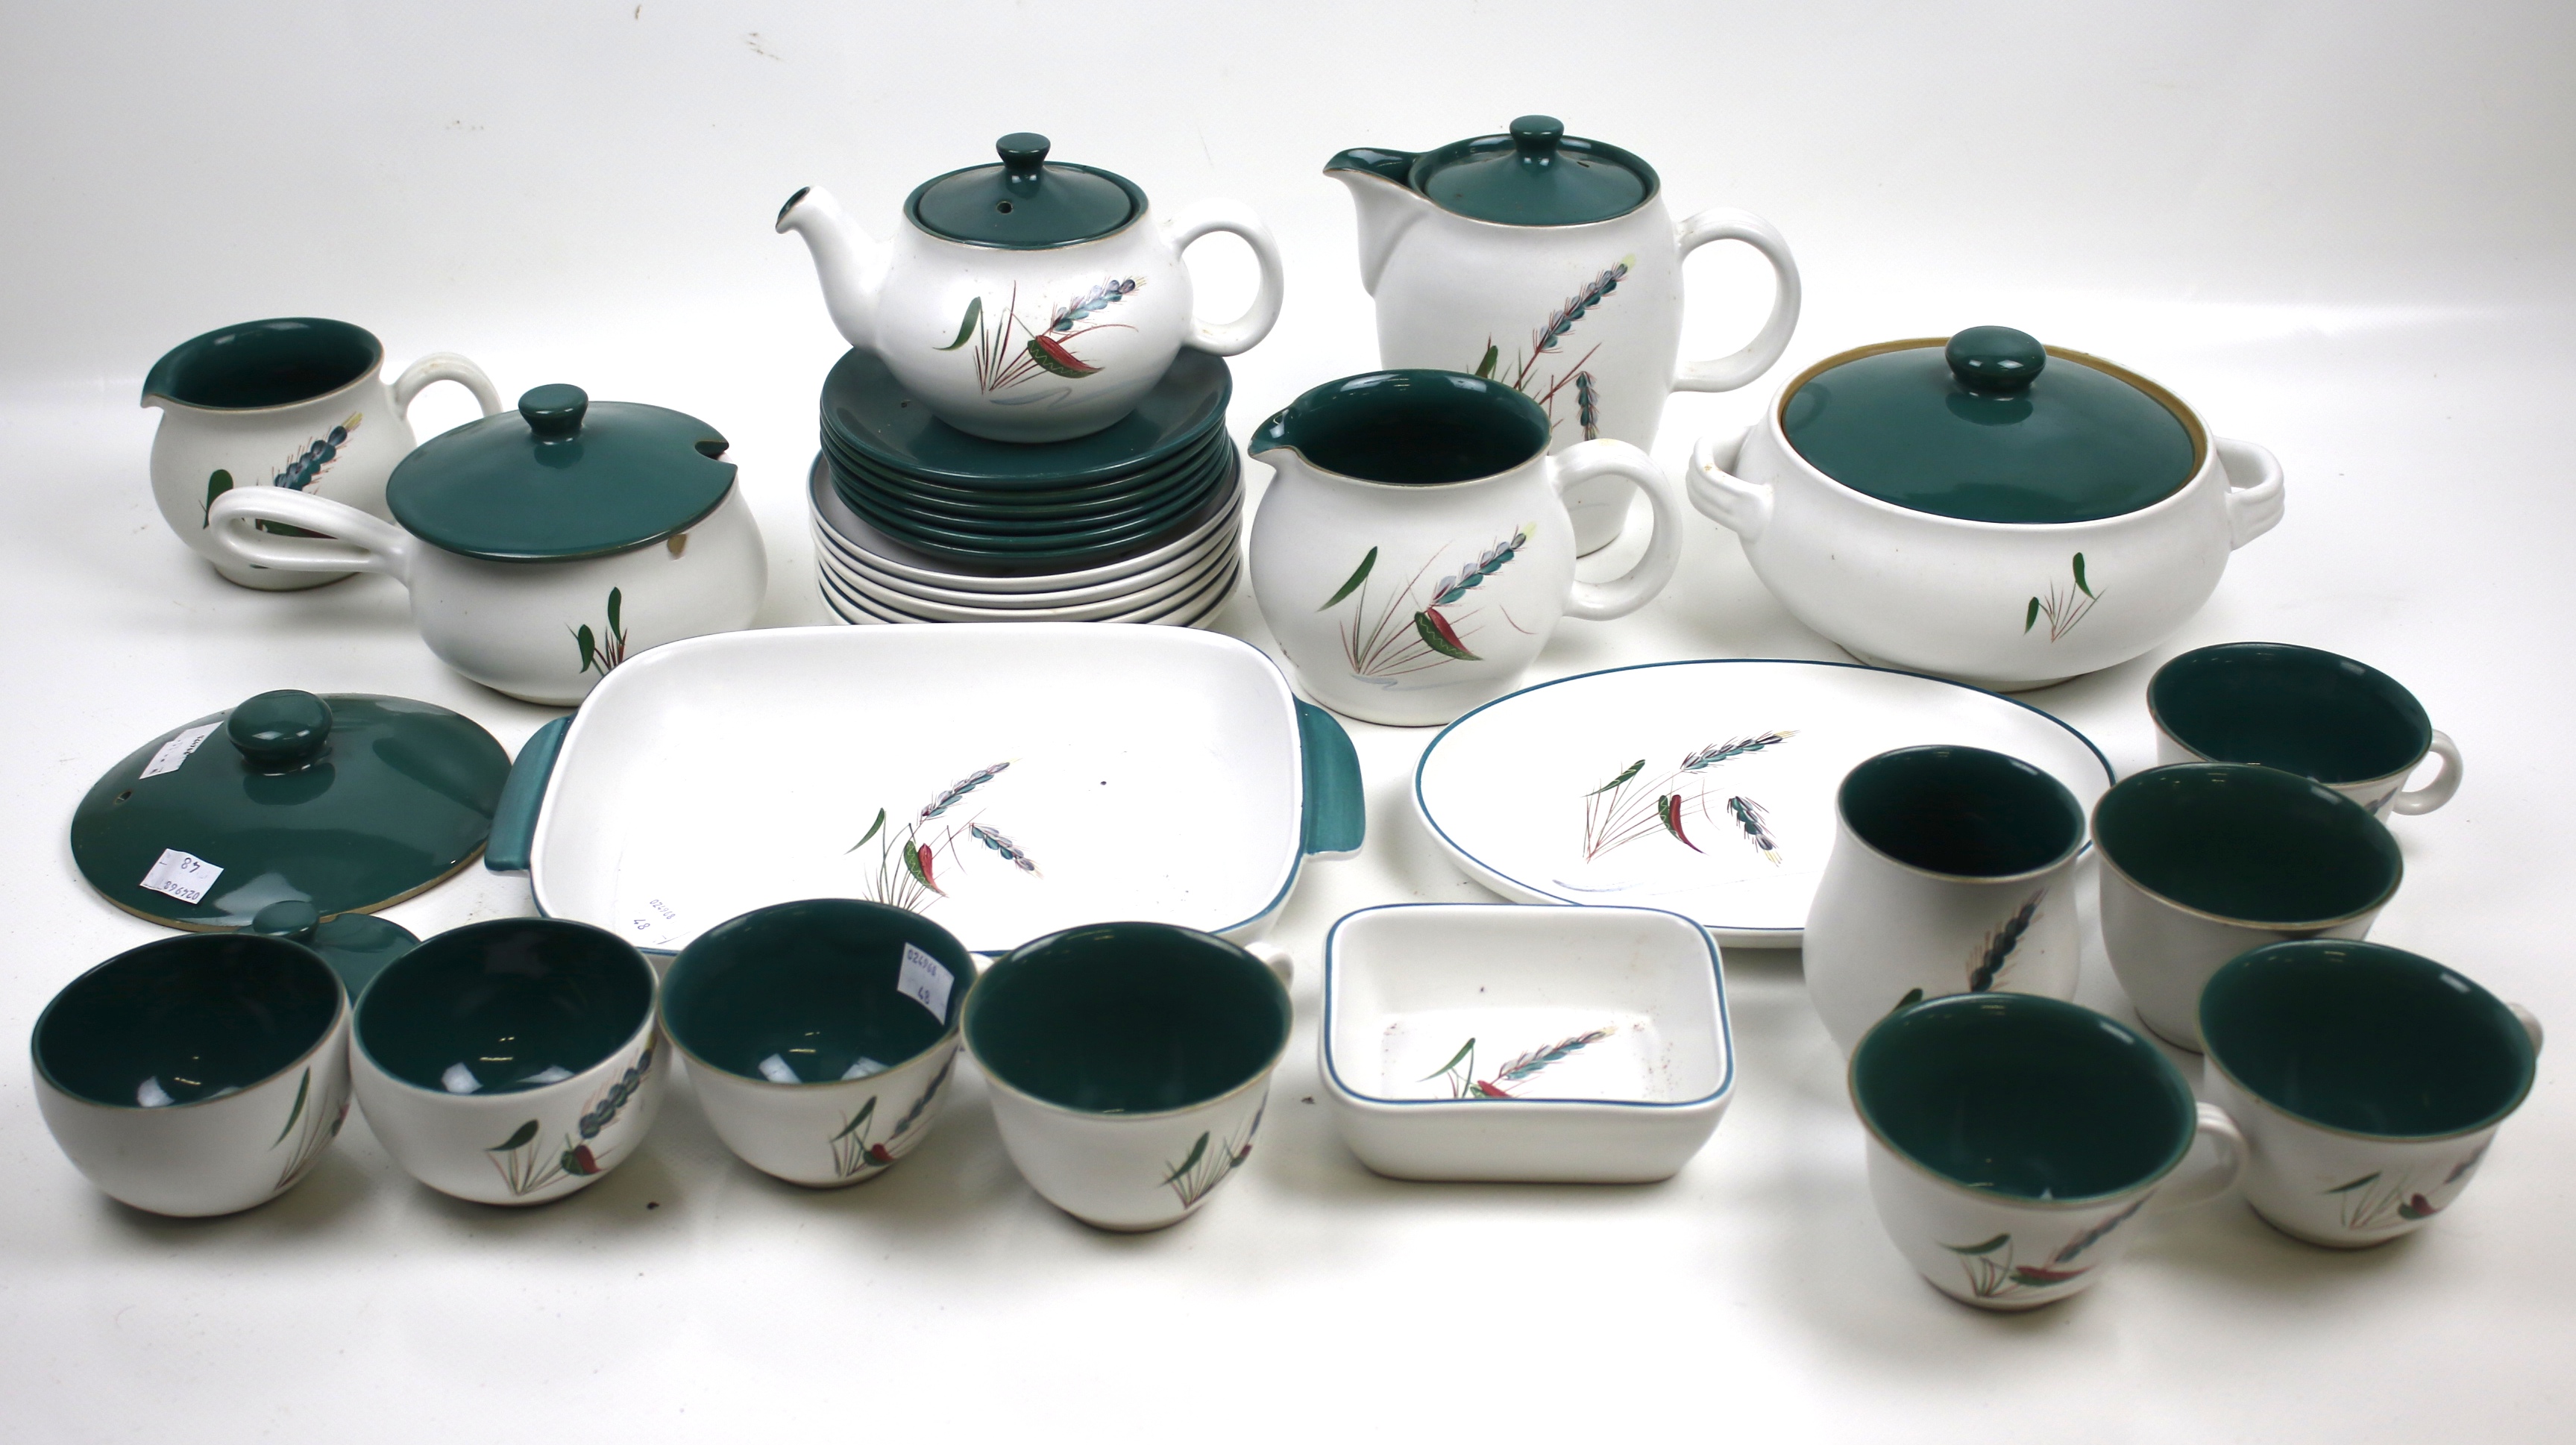 A Denby Pottery tea and dinner service in the 'Greenwheat' pattern.